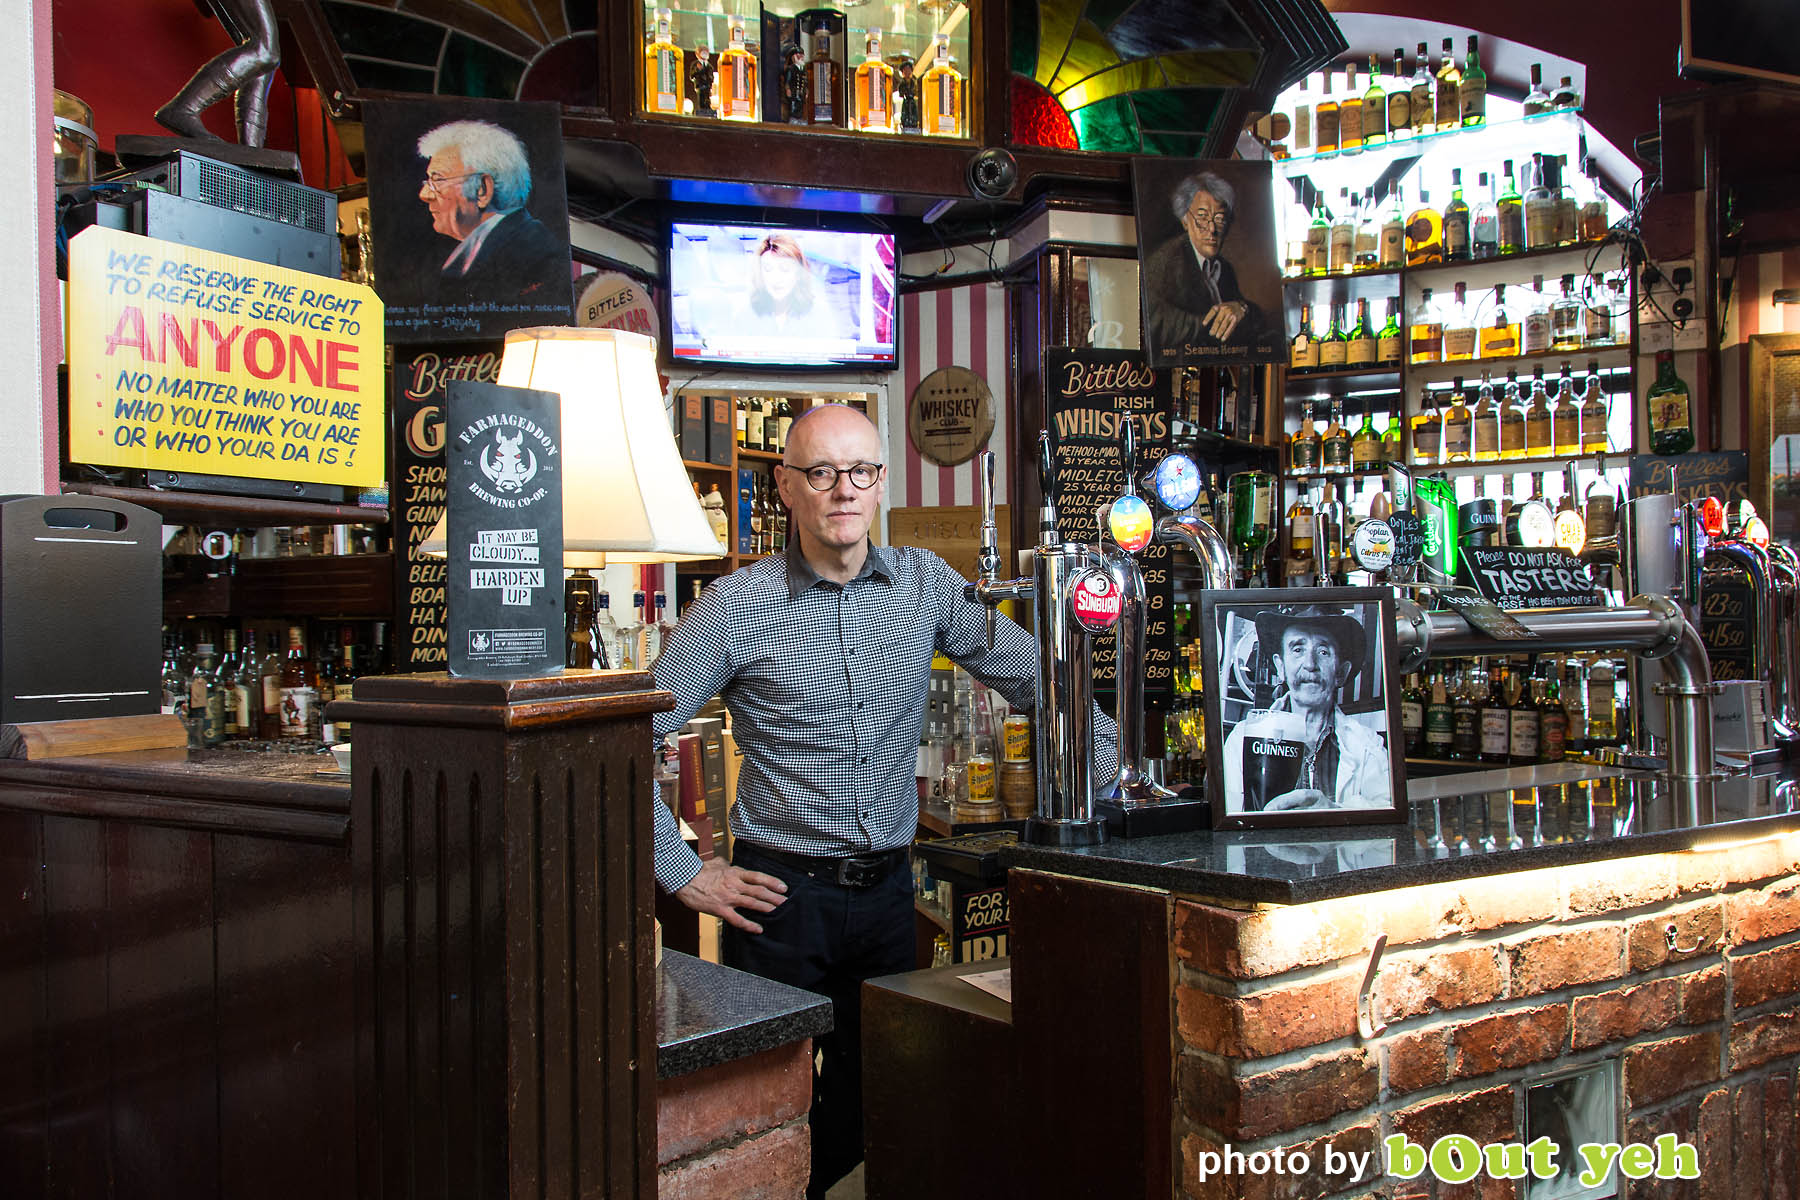 John Bittles at Bittles Bar by Bout Yeh photographers Belfast - Photo 5004. Editorial feature about John Bittles, owner of Bittles Bar, Belfast.